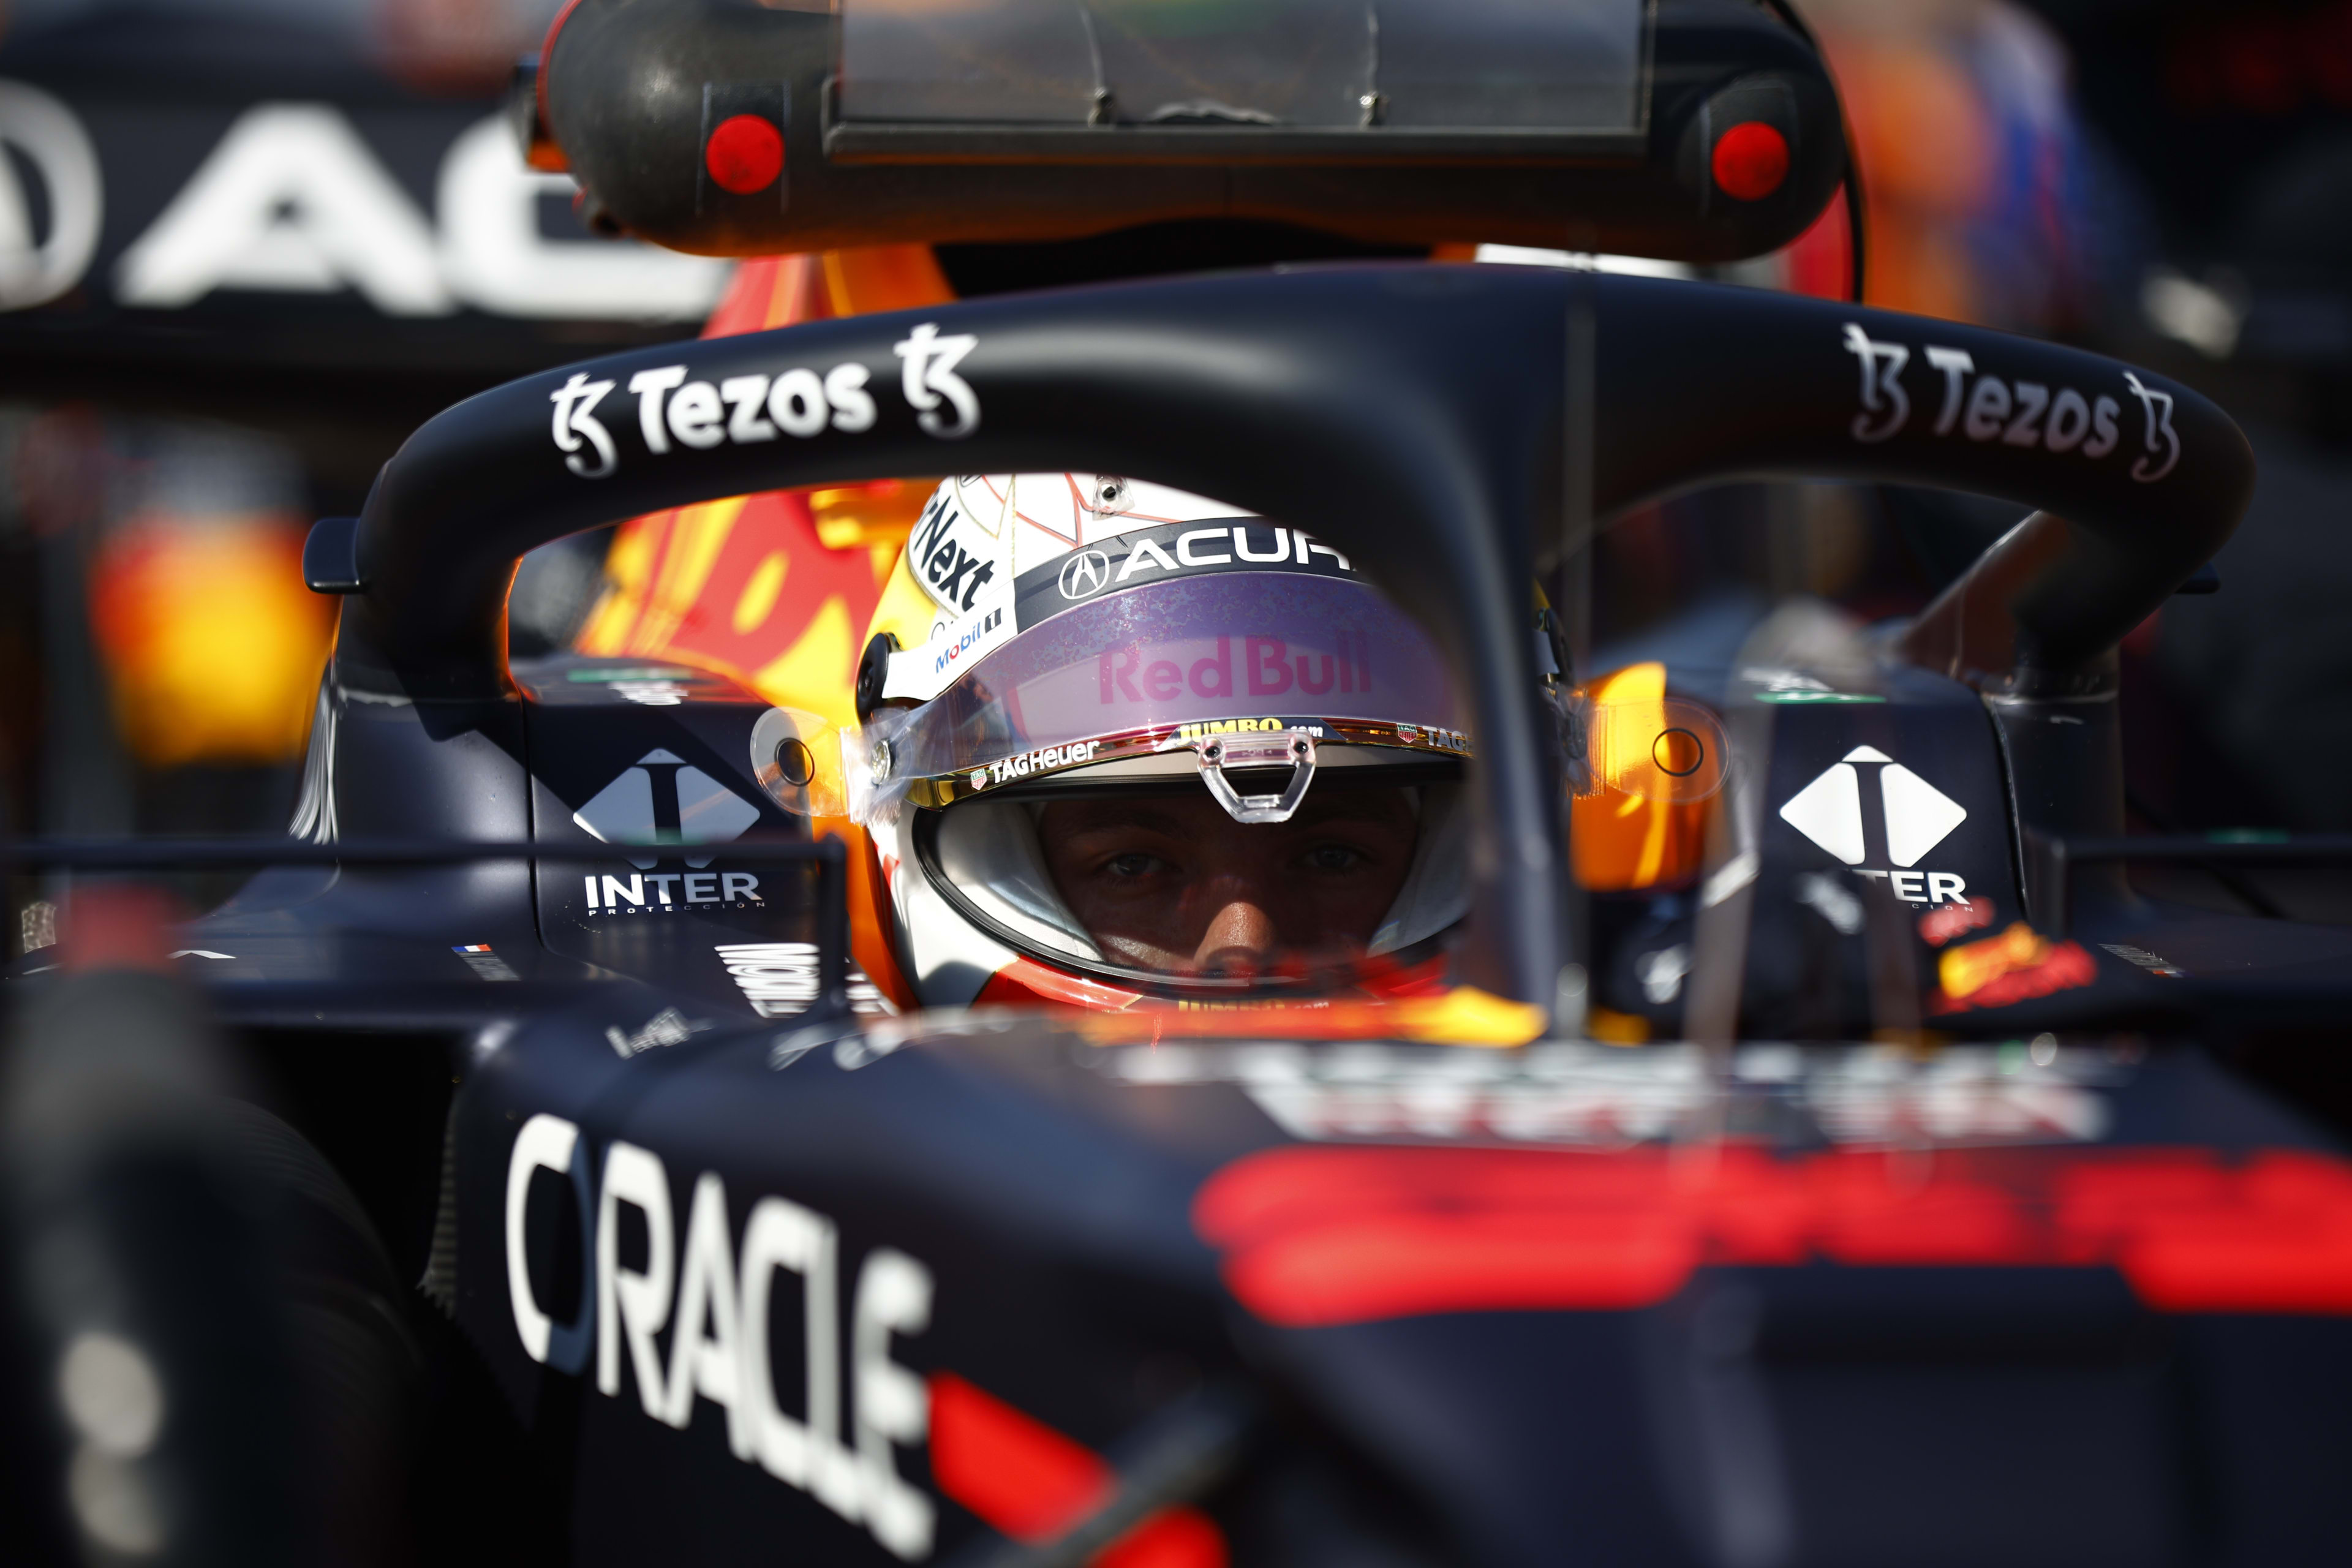 Mam Onderdompeling ginder Max Verstappen urges Red Bull to 'nail' Mexico-Brazil-Qatar triple header  as title fight reaches final stages | Formula 1®